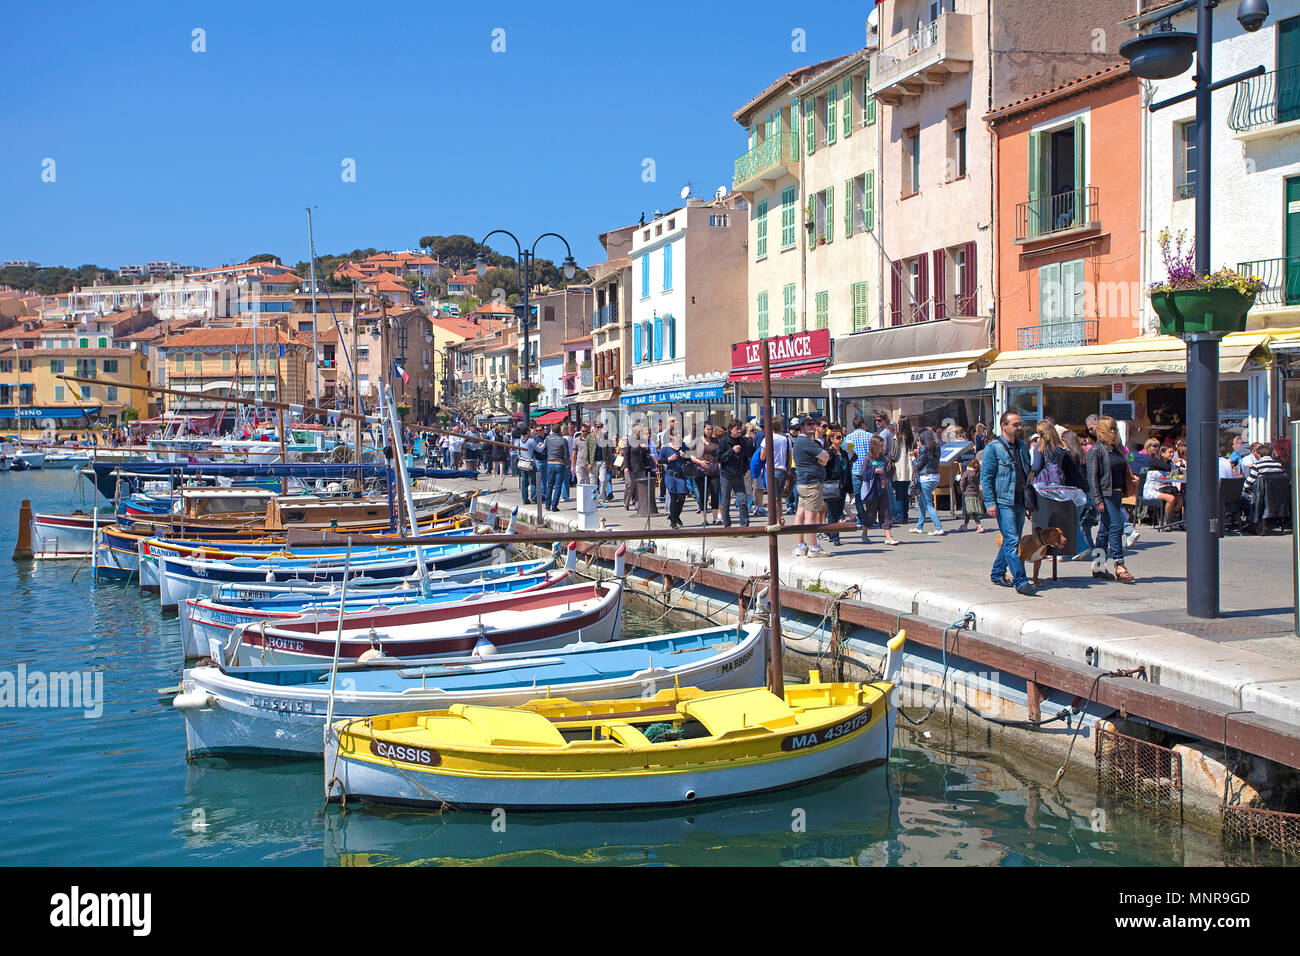 Fishing harbour of Cassis, Bouches-du-Rhone, Provence-Alpes-Côte d’Azur, South France, France, Europe Stock Photo